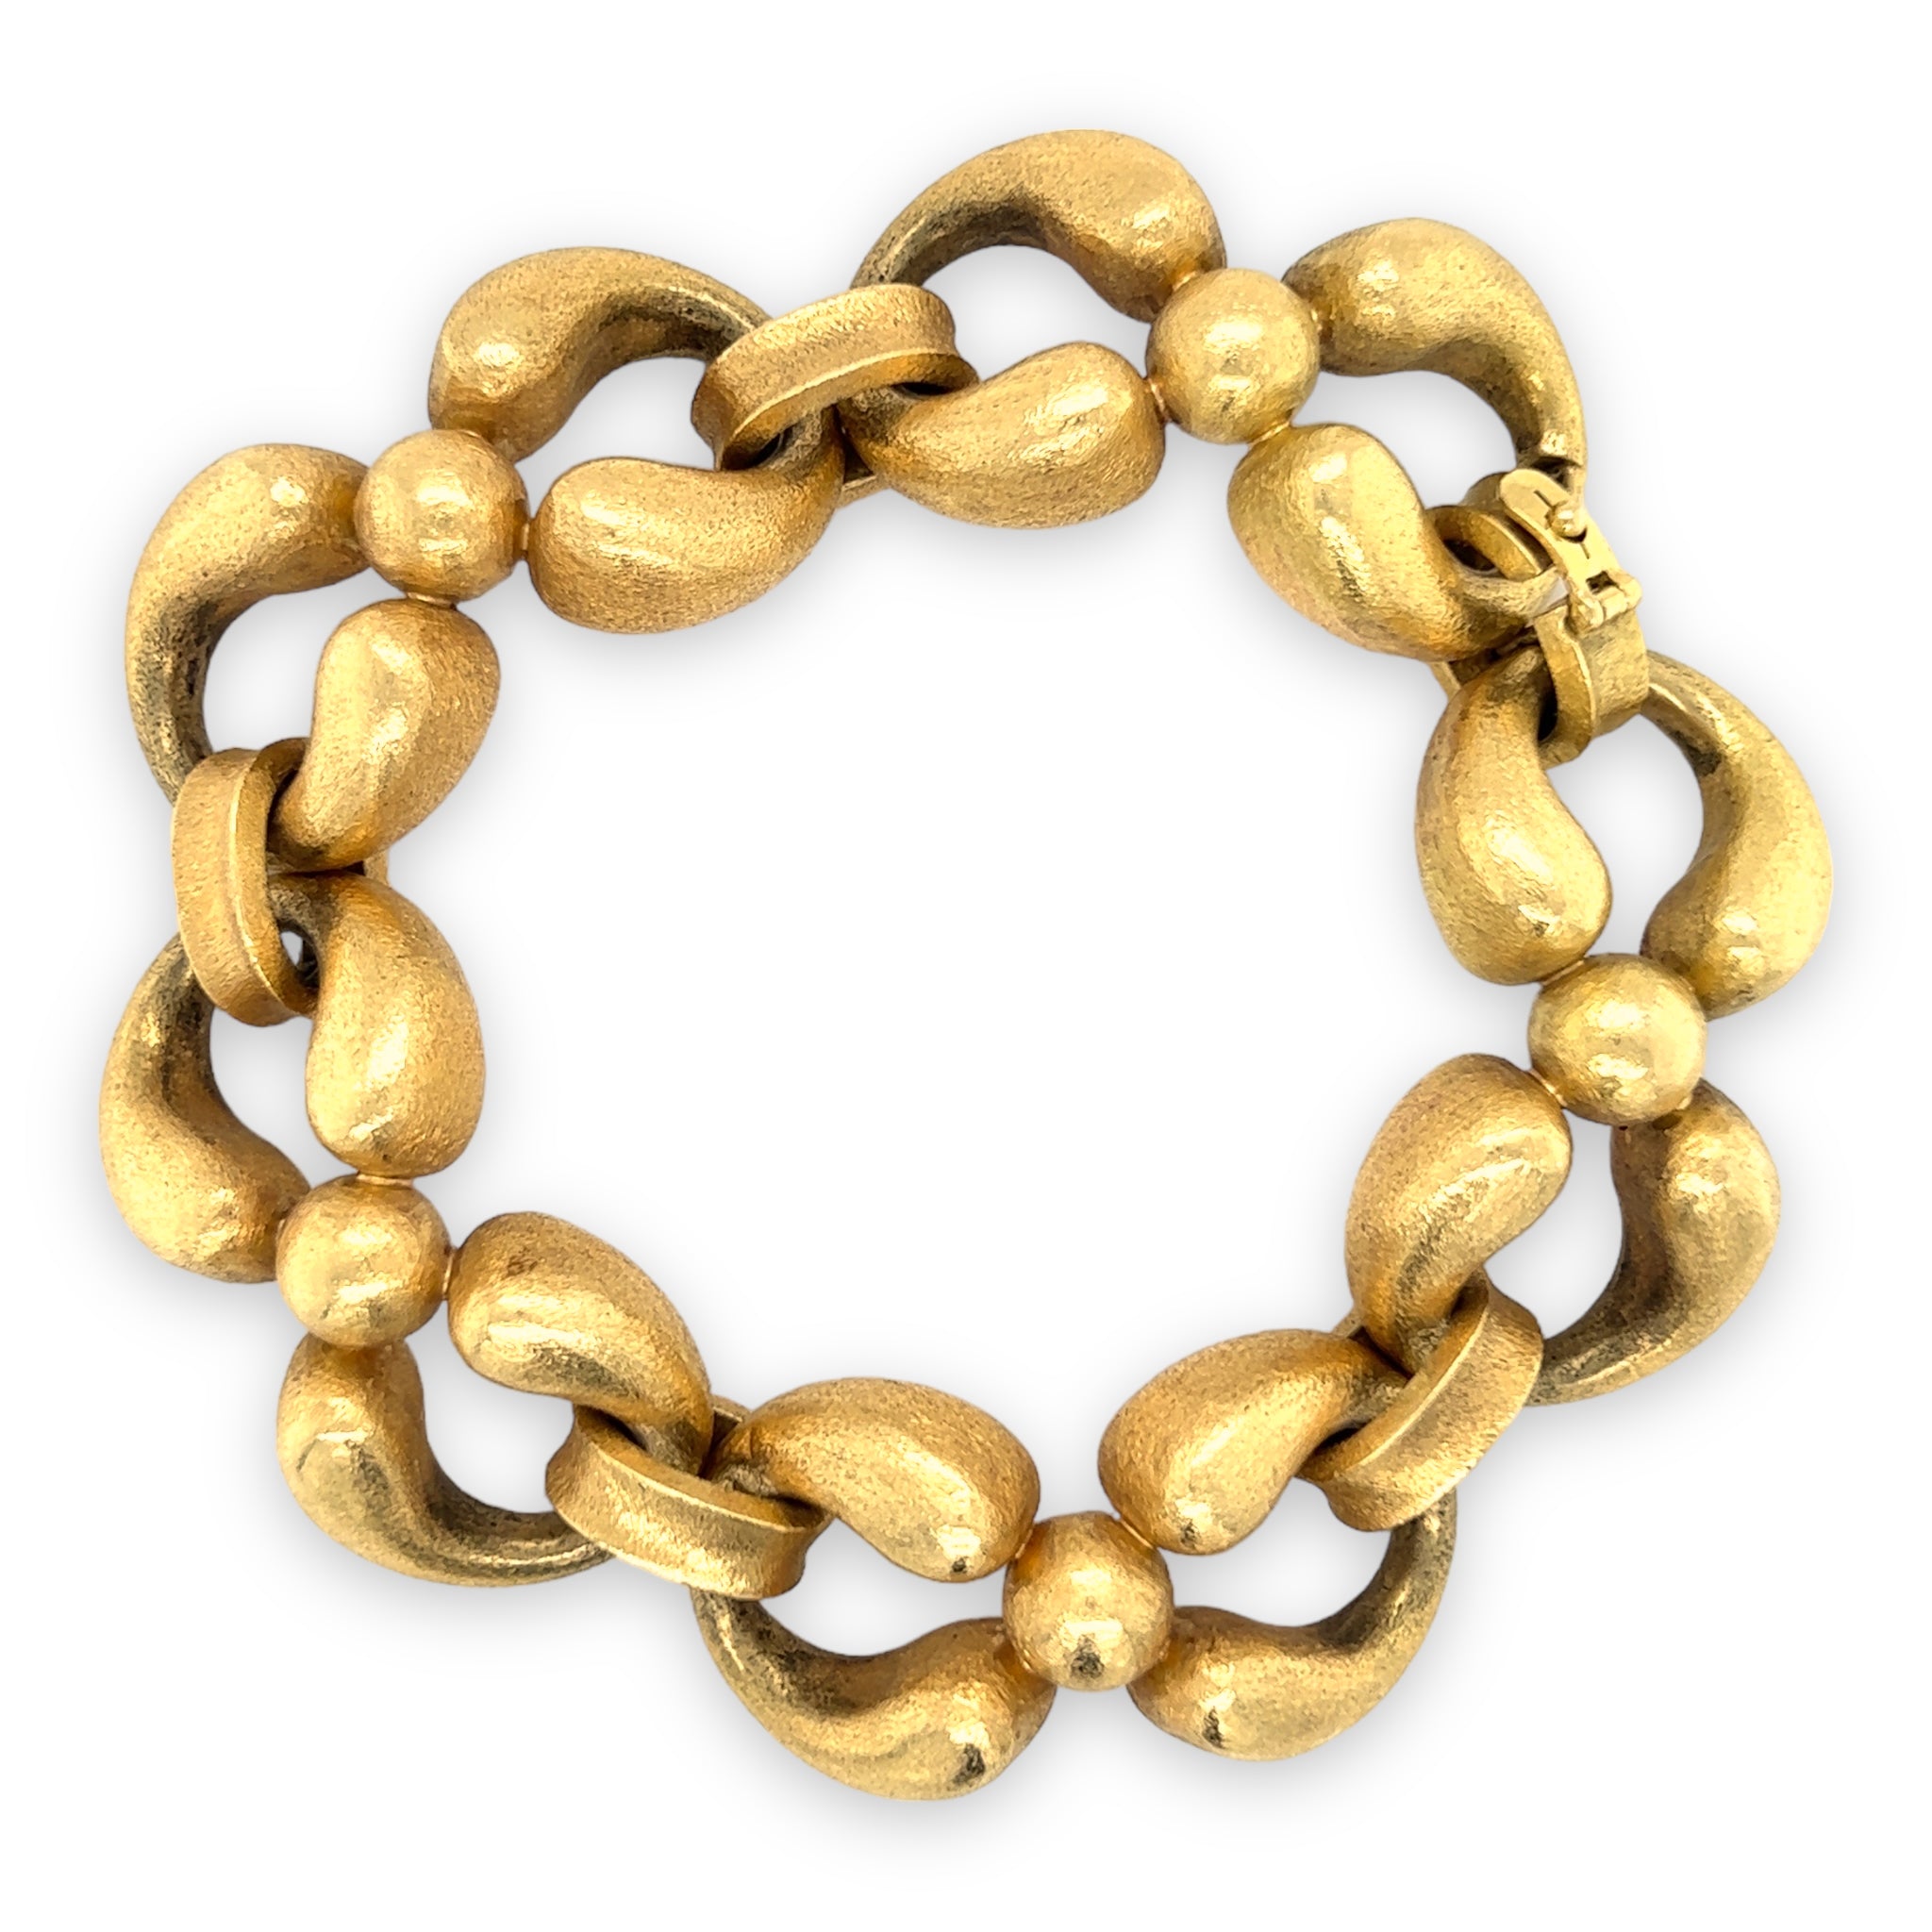 18ct Gold Plated Sterling Silver Pearl Bracelet - TK Maxx UK